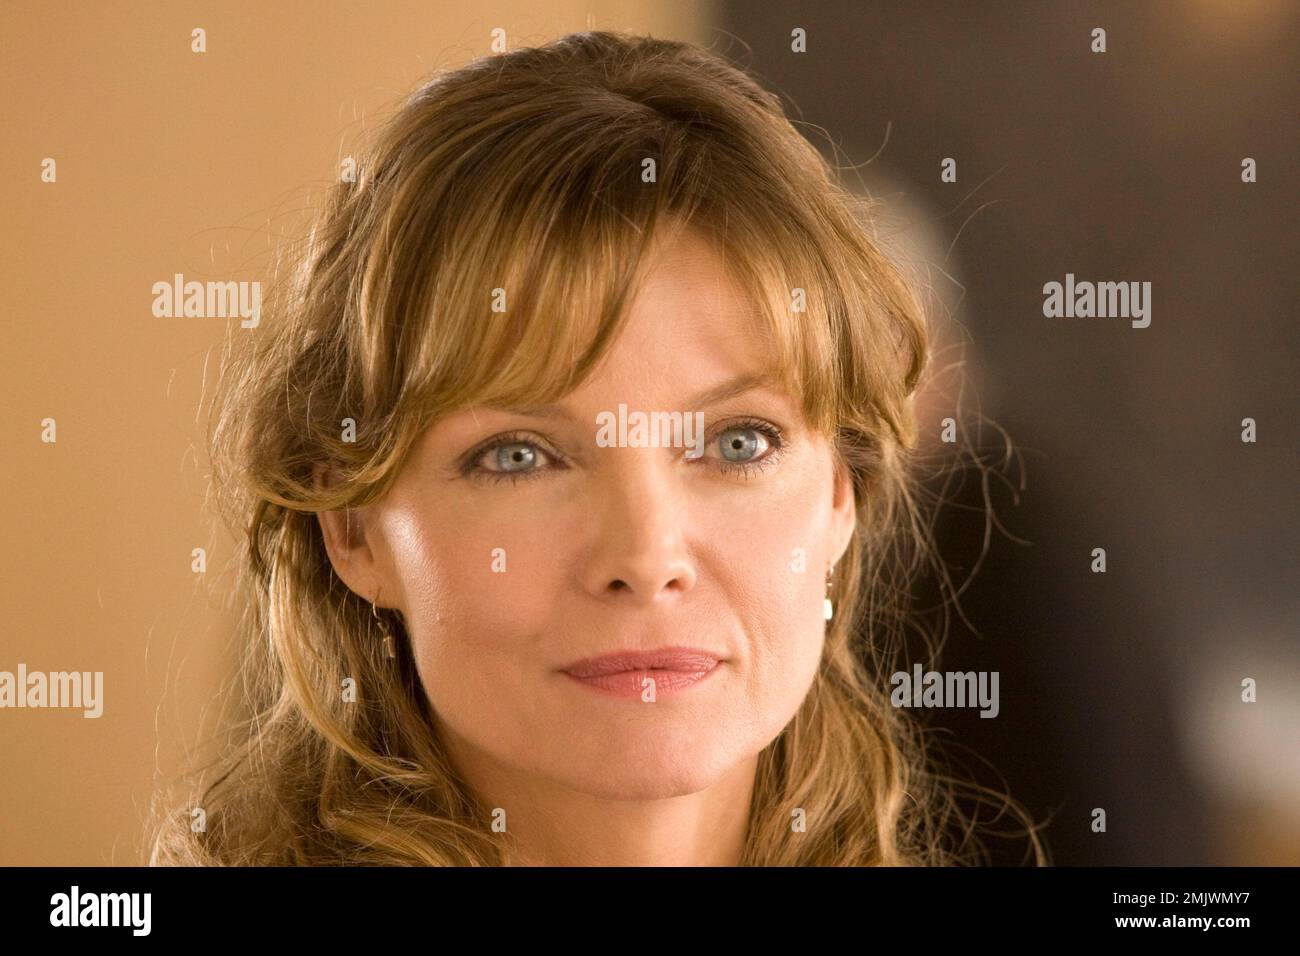 MICHELLE PFEIFFER in PERSONAL EFFECTS (2009), directed by DAVID HOLLANDER. Copyright: Editorial use only. No merchandising or book covers. This is a publicly distributed handout. Access rights only, no license of copyright provided. Only to be reproduced in conjunction with promotion of this film. Credit: Three Rivers Entetainment / Album Stock Photo